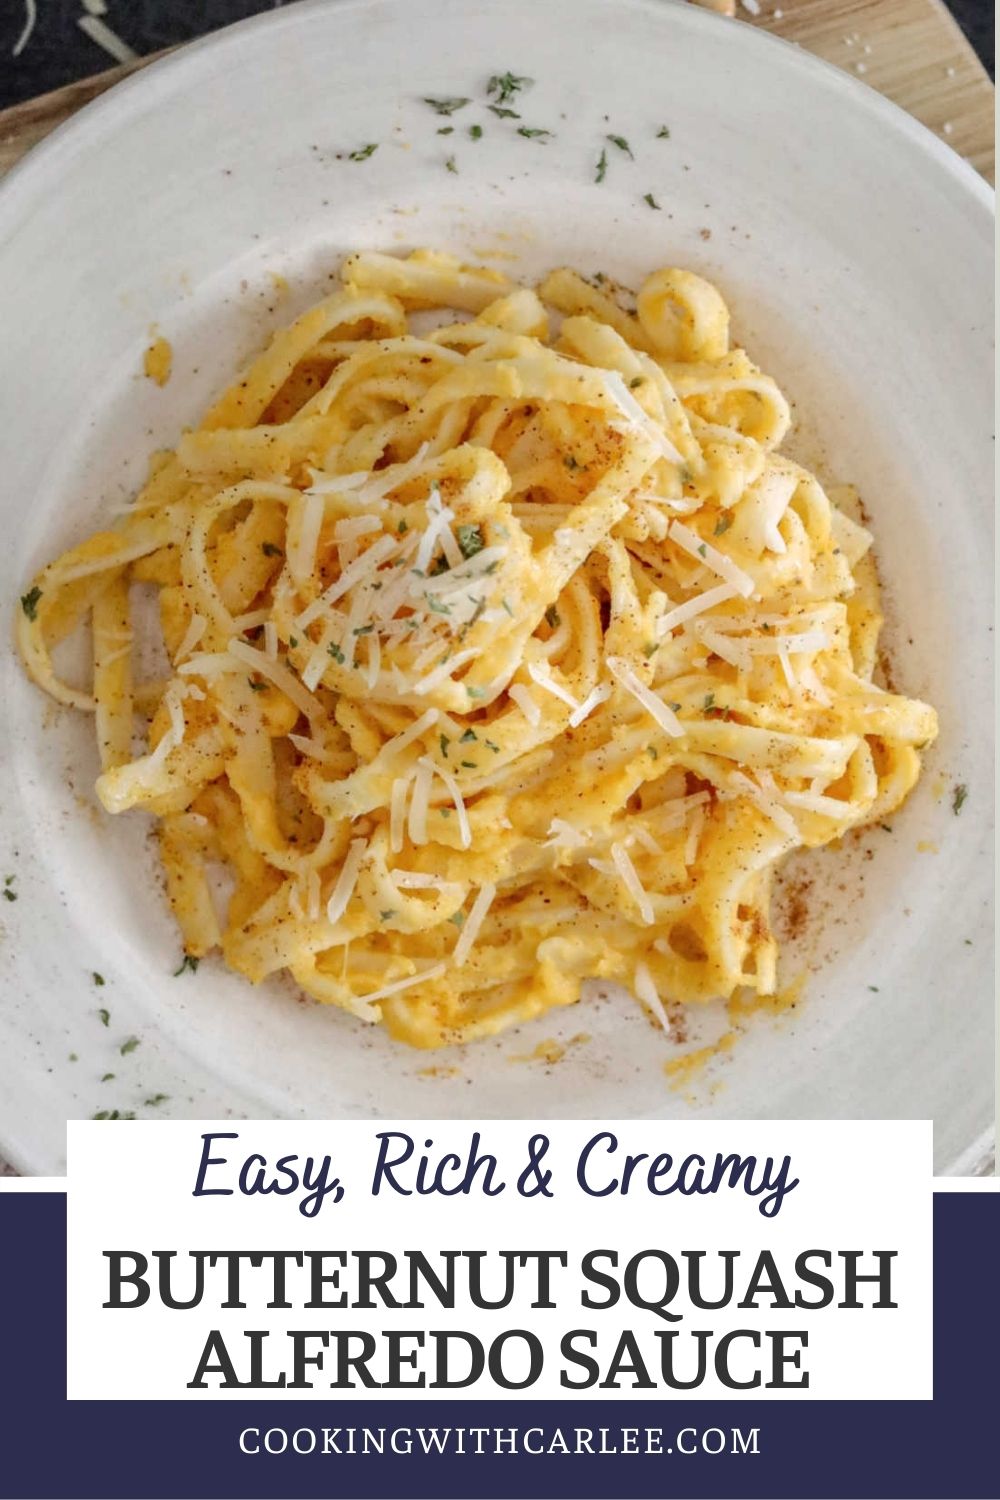 Creamy butternut squash alfredo sauce has all of the cheesy richness you would expect in a good Alfredo with a lighter twist. The butternut squash brings great color and a little bit of a sweet and earthy undertone that makes it extra delicious.